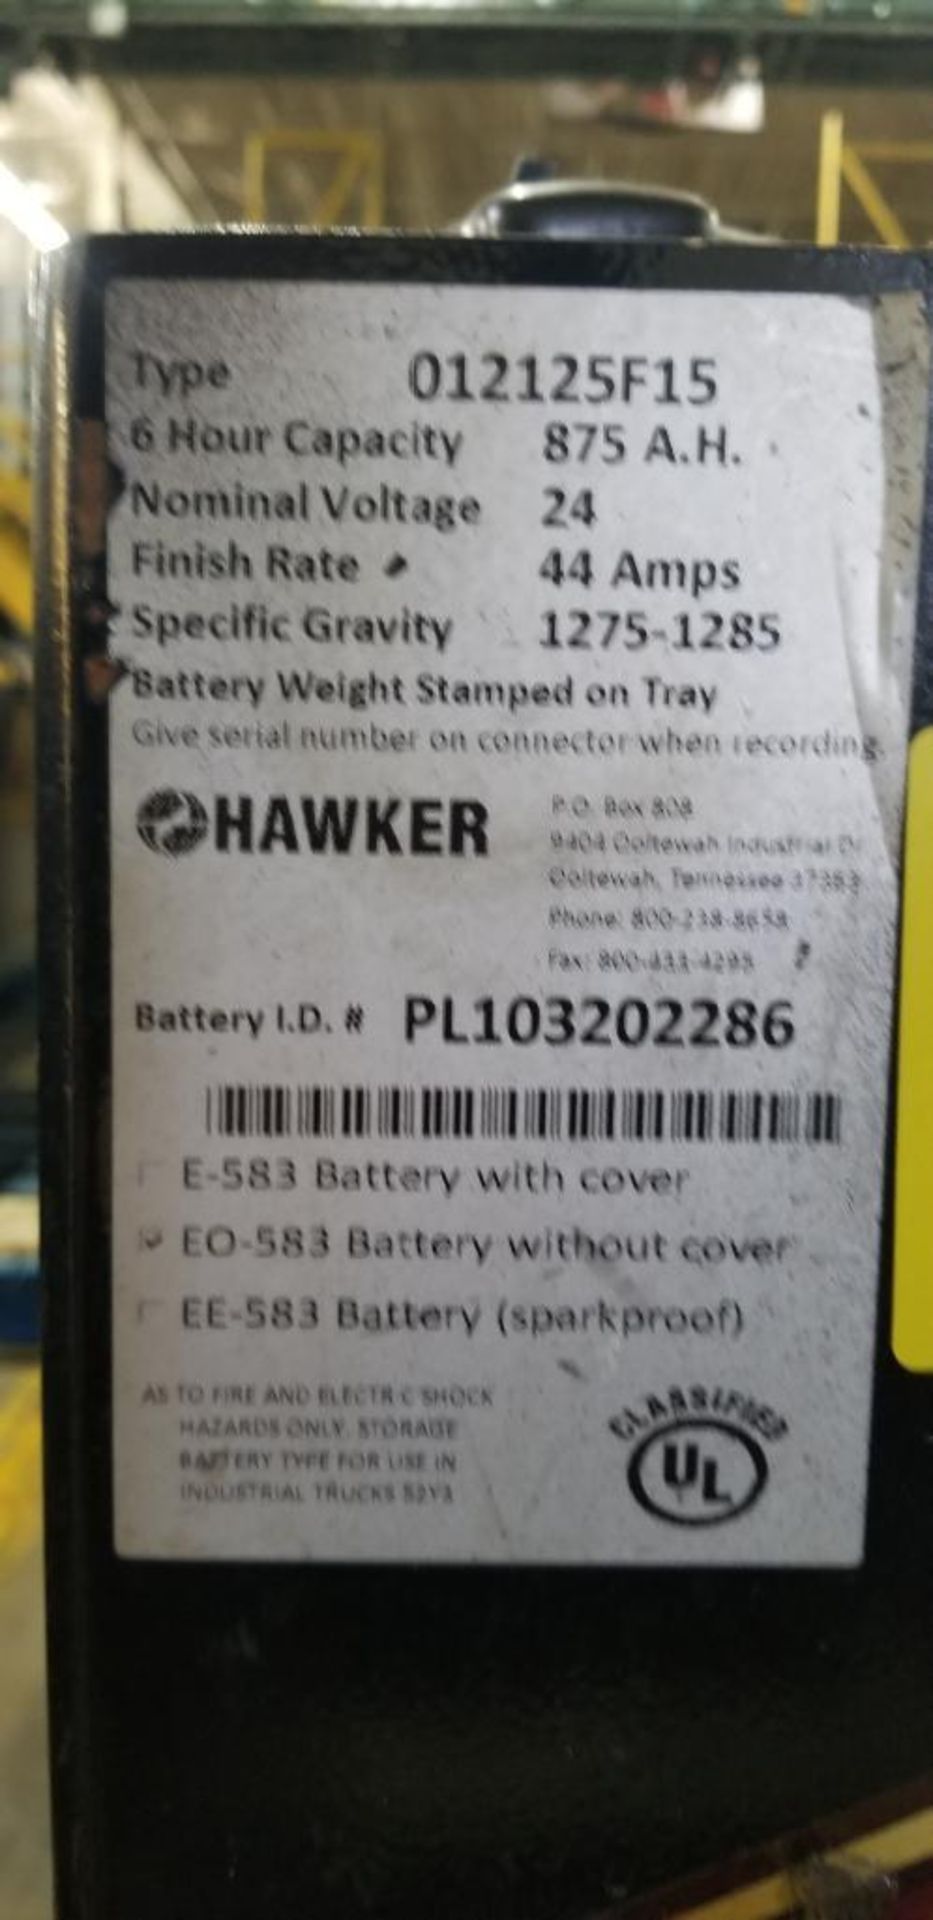 (2x) Hawker Powerline Batteries, 24V, 875A.H., Battery Weight: 1,728 & 1,735 LB., L36"xW14"xH31" ($5 - Image 4 of 7